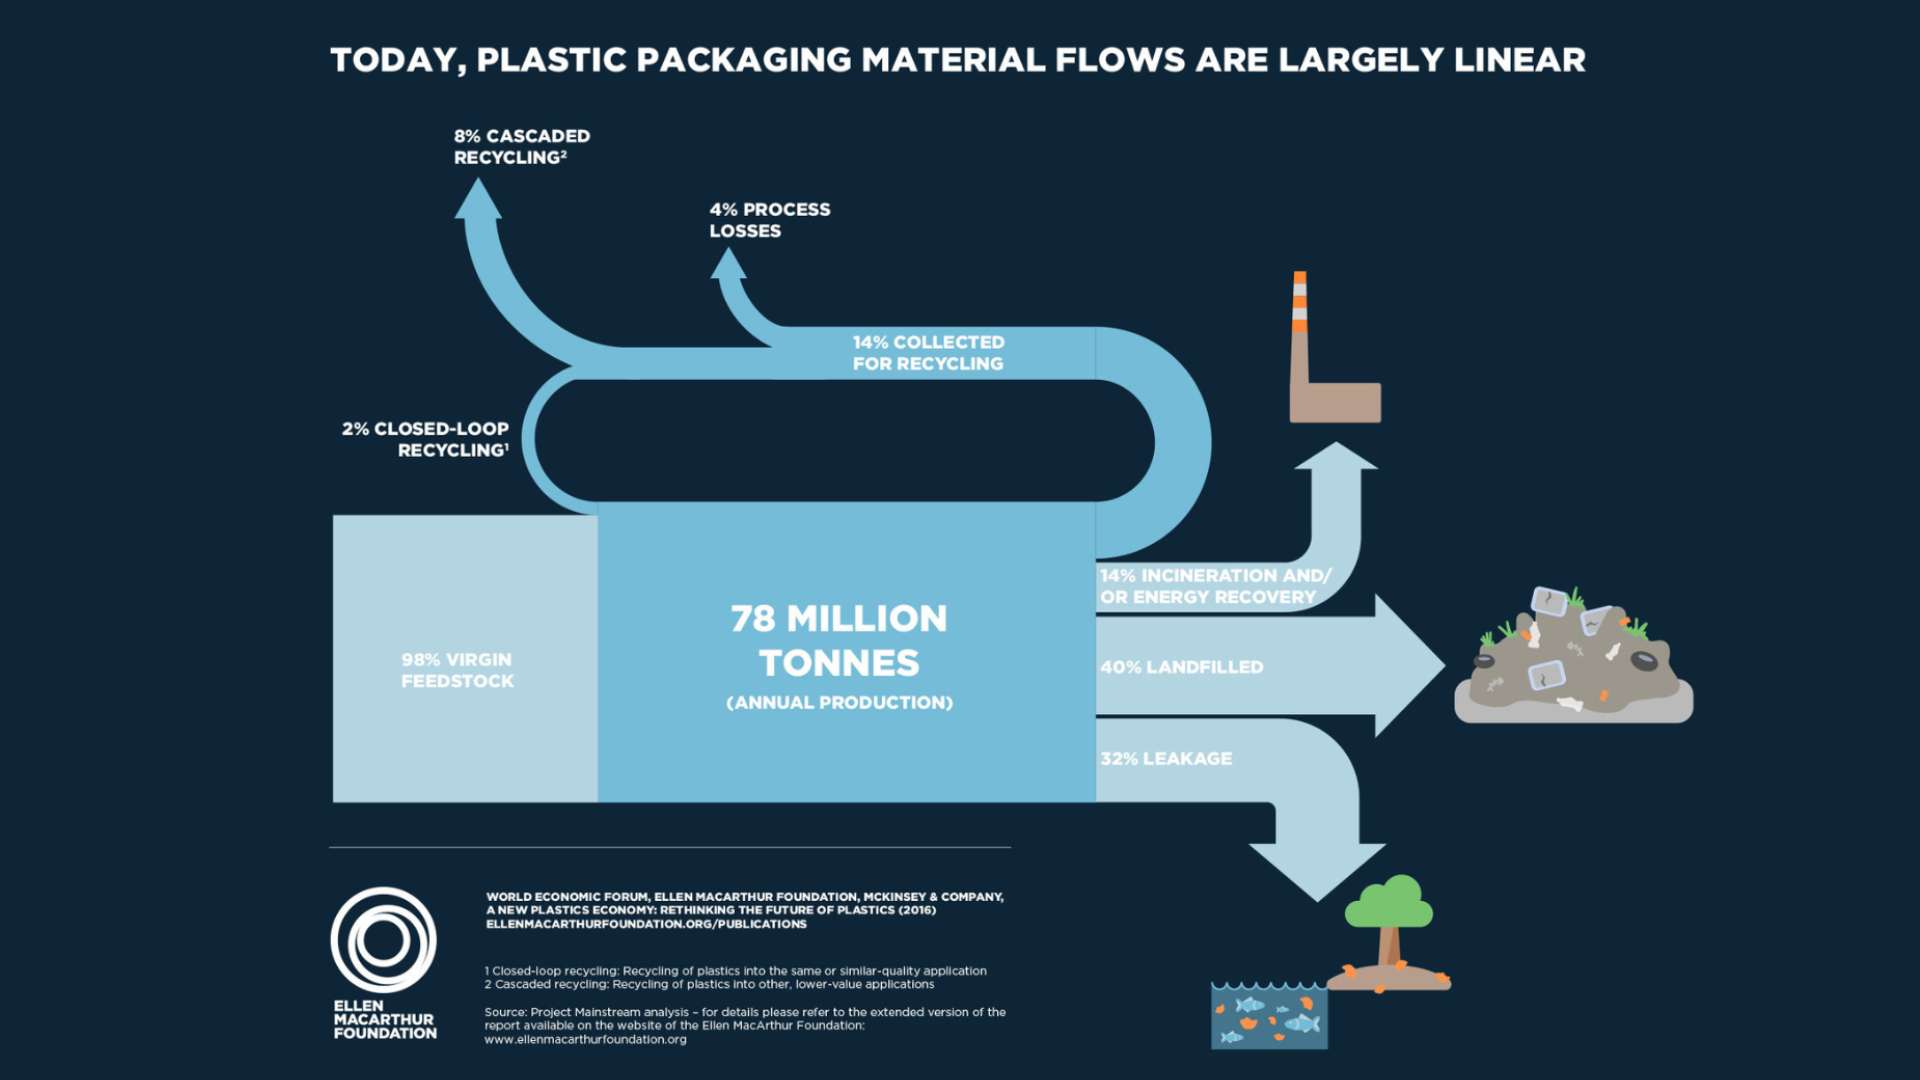 According to Ellen MacArthur Foundation, currently, most of the plastic is incinerated, ends up in a landfill, or leaks into the environment